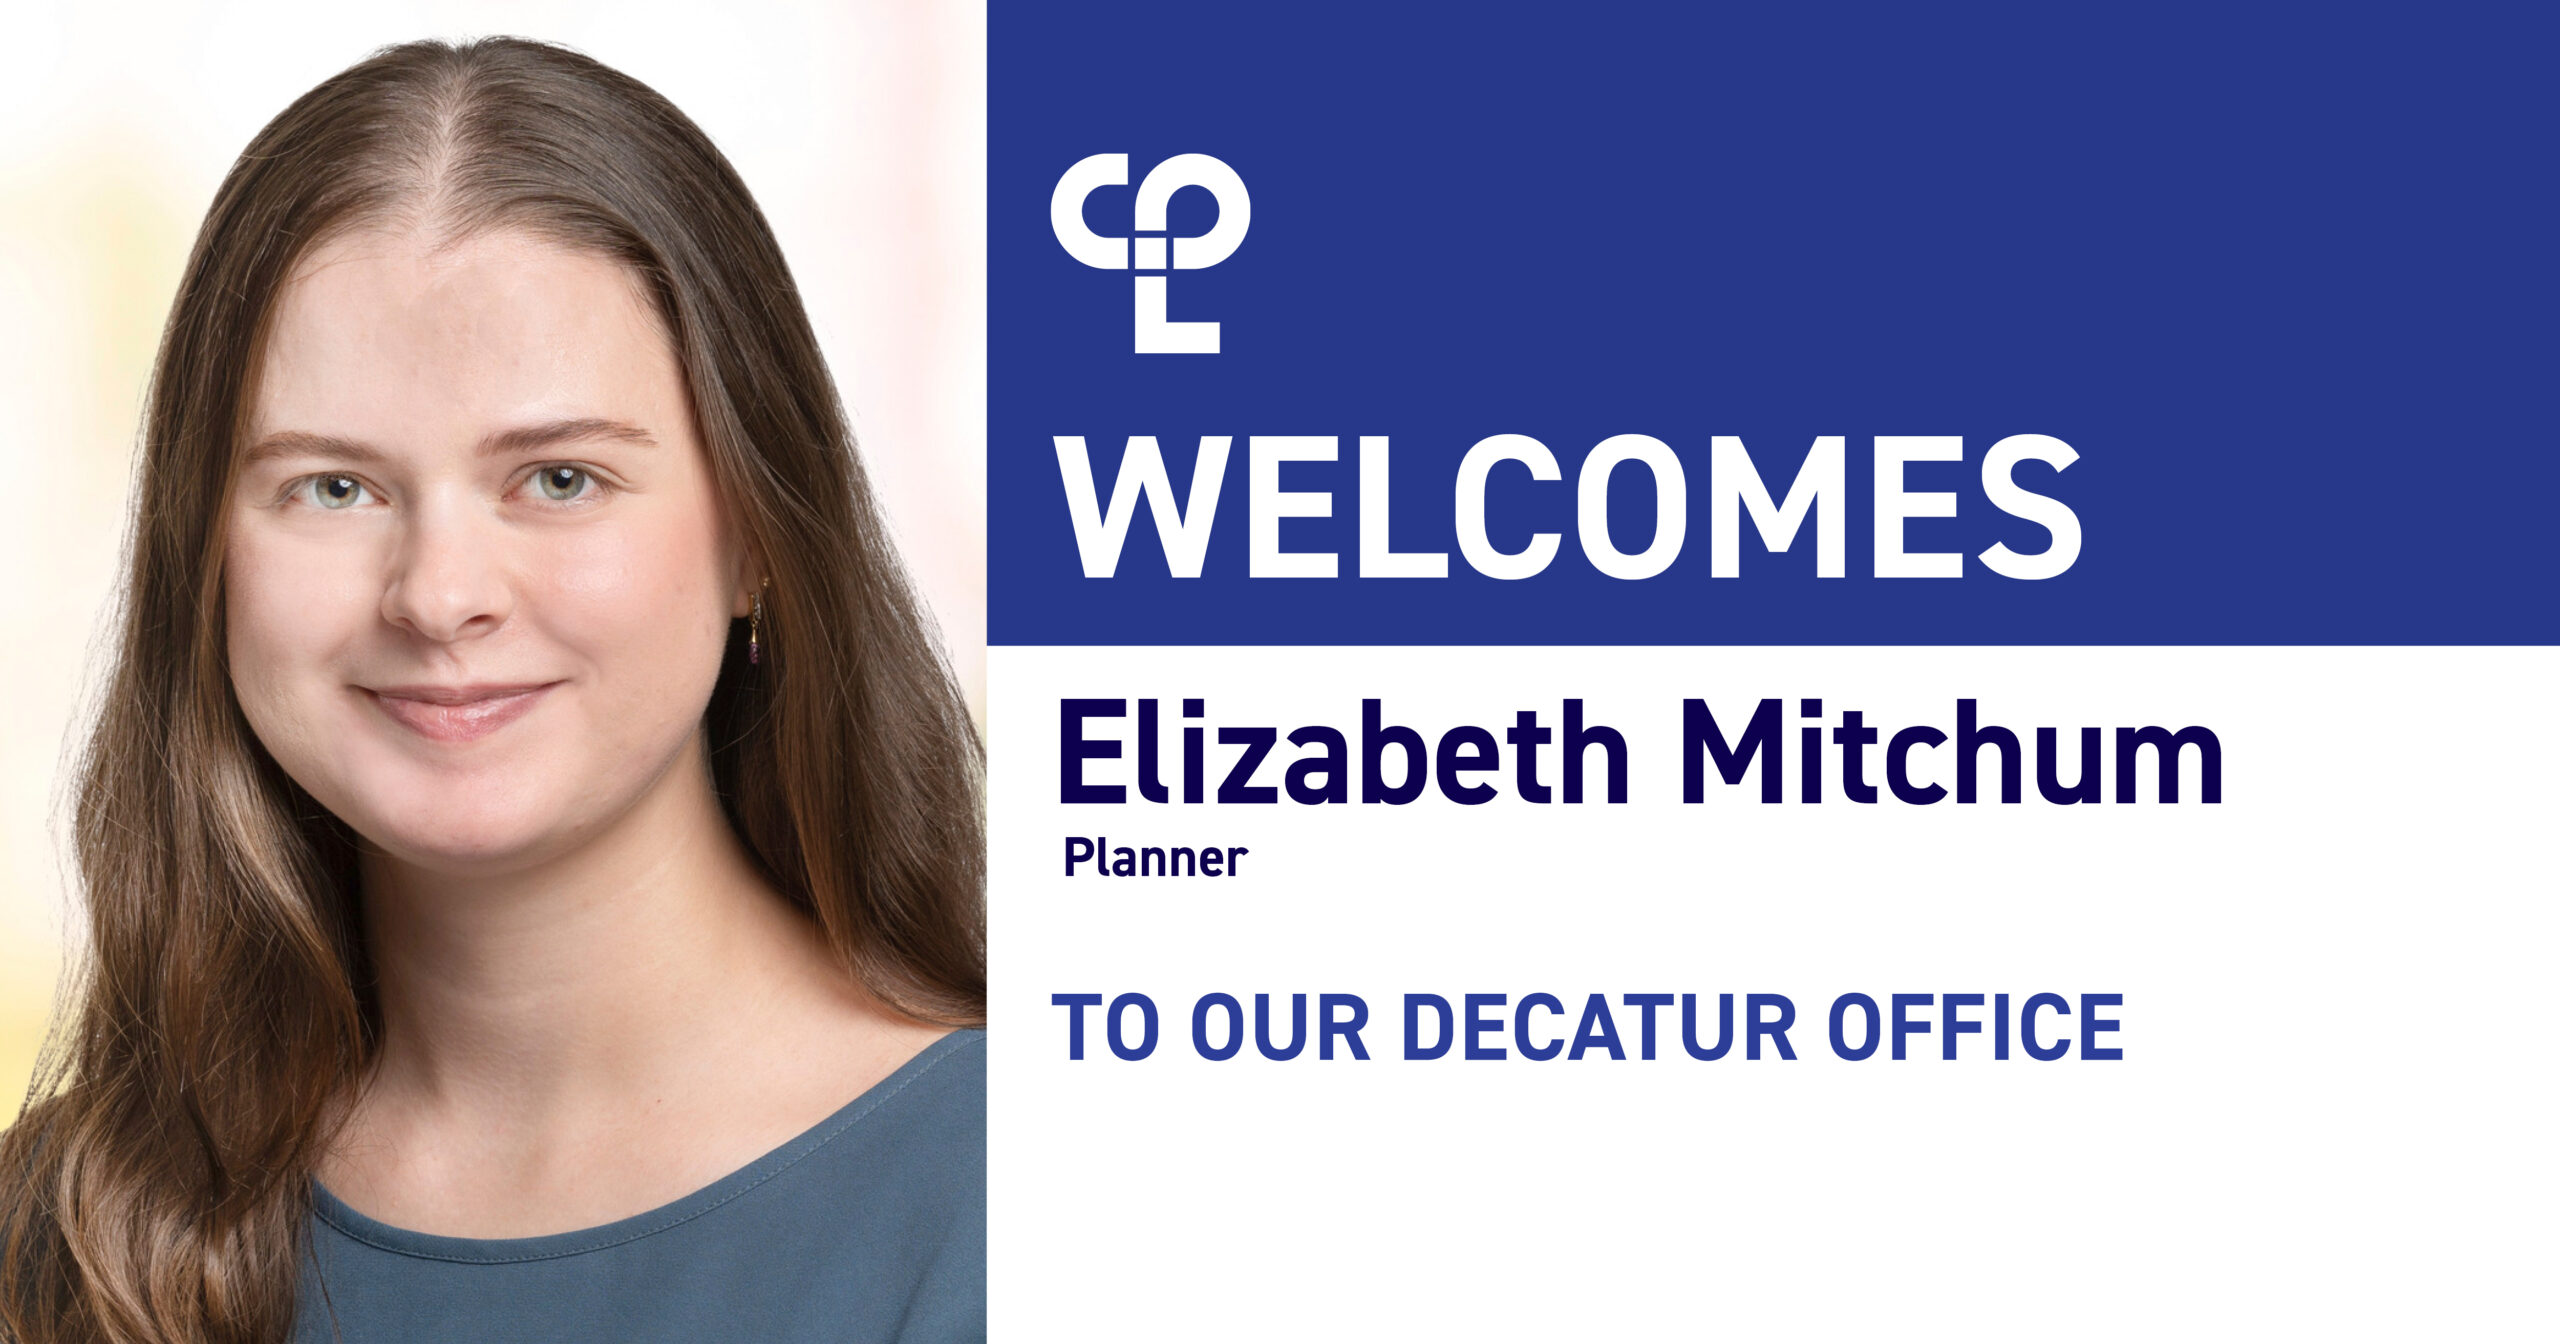 Woman in dark blue shirt next to text that reads "CPL Welcomes Elizabeth Mitchum, Planner, to our Decatur Office"